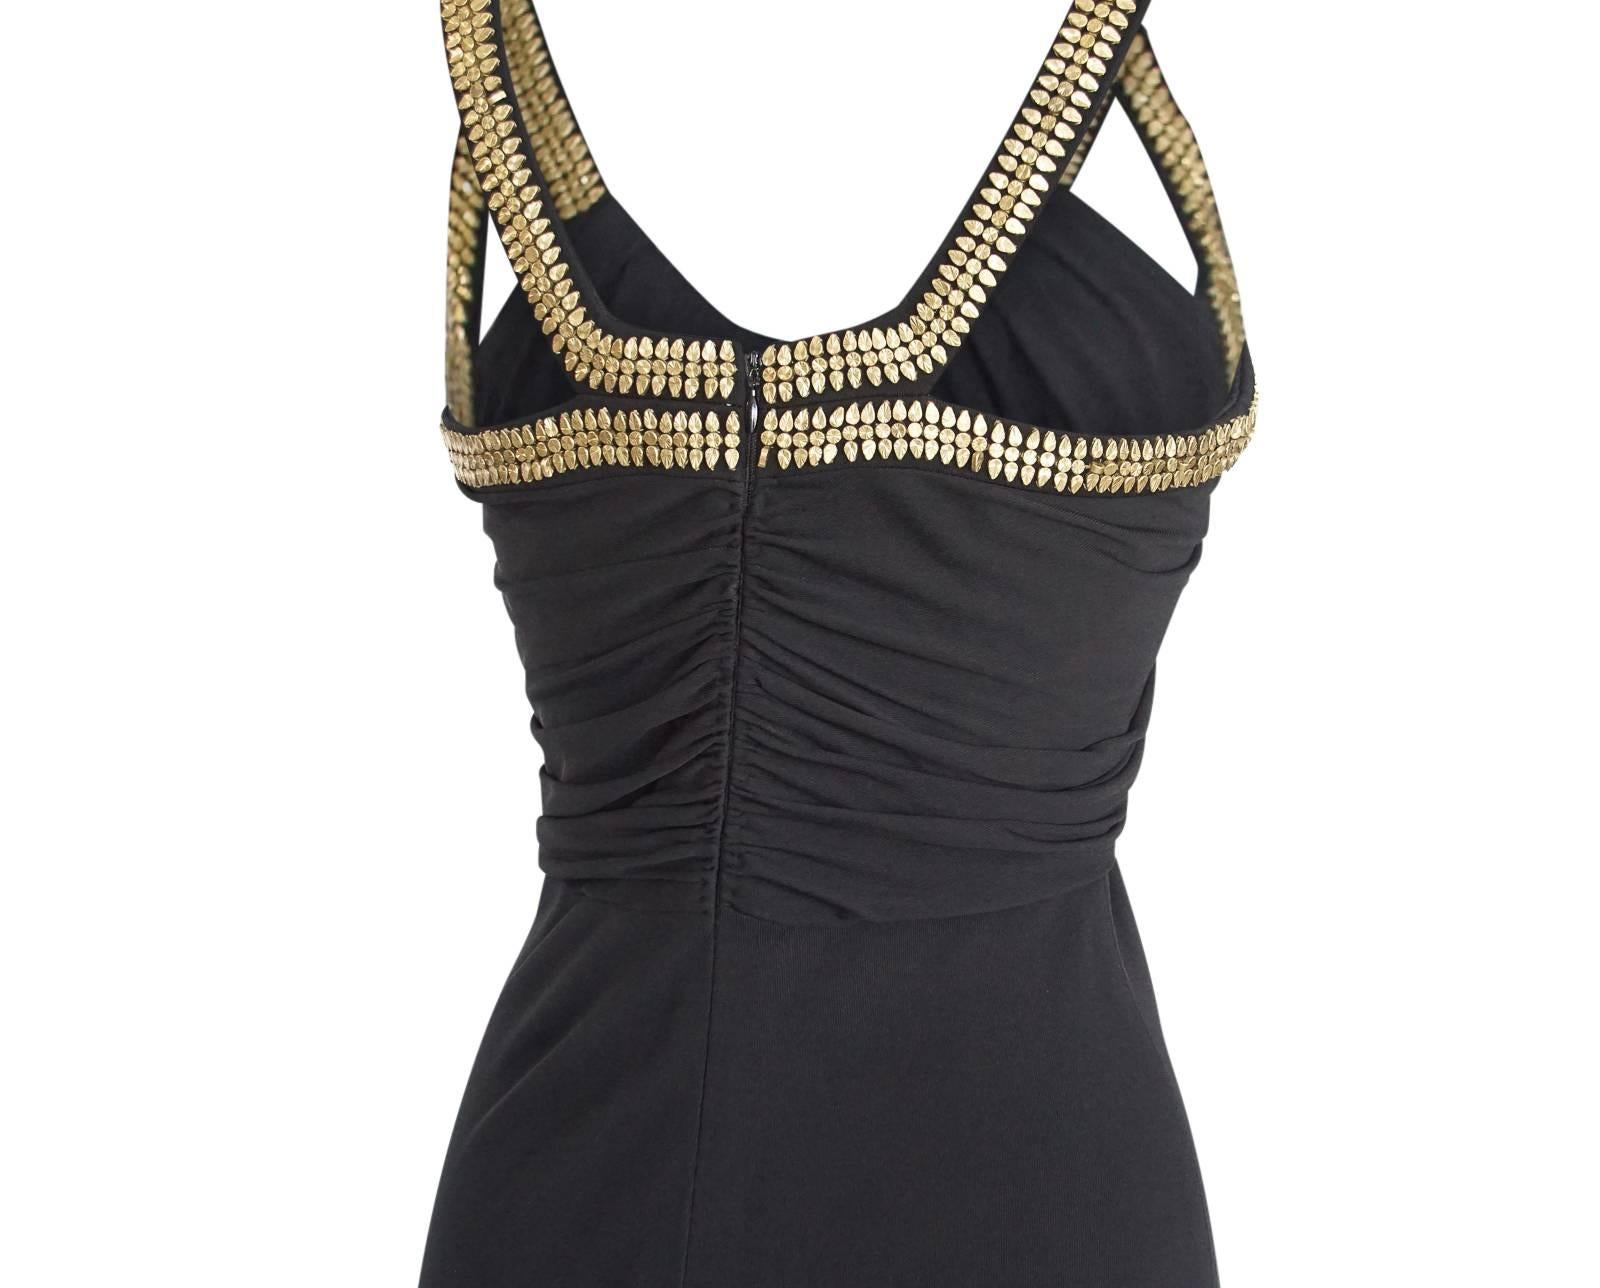 Versace Dress Gold Hardware Black pleated and Rouched  40 / 4 5